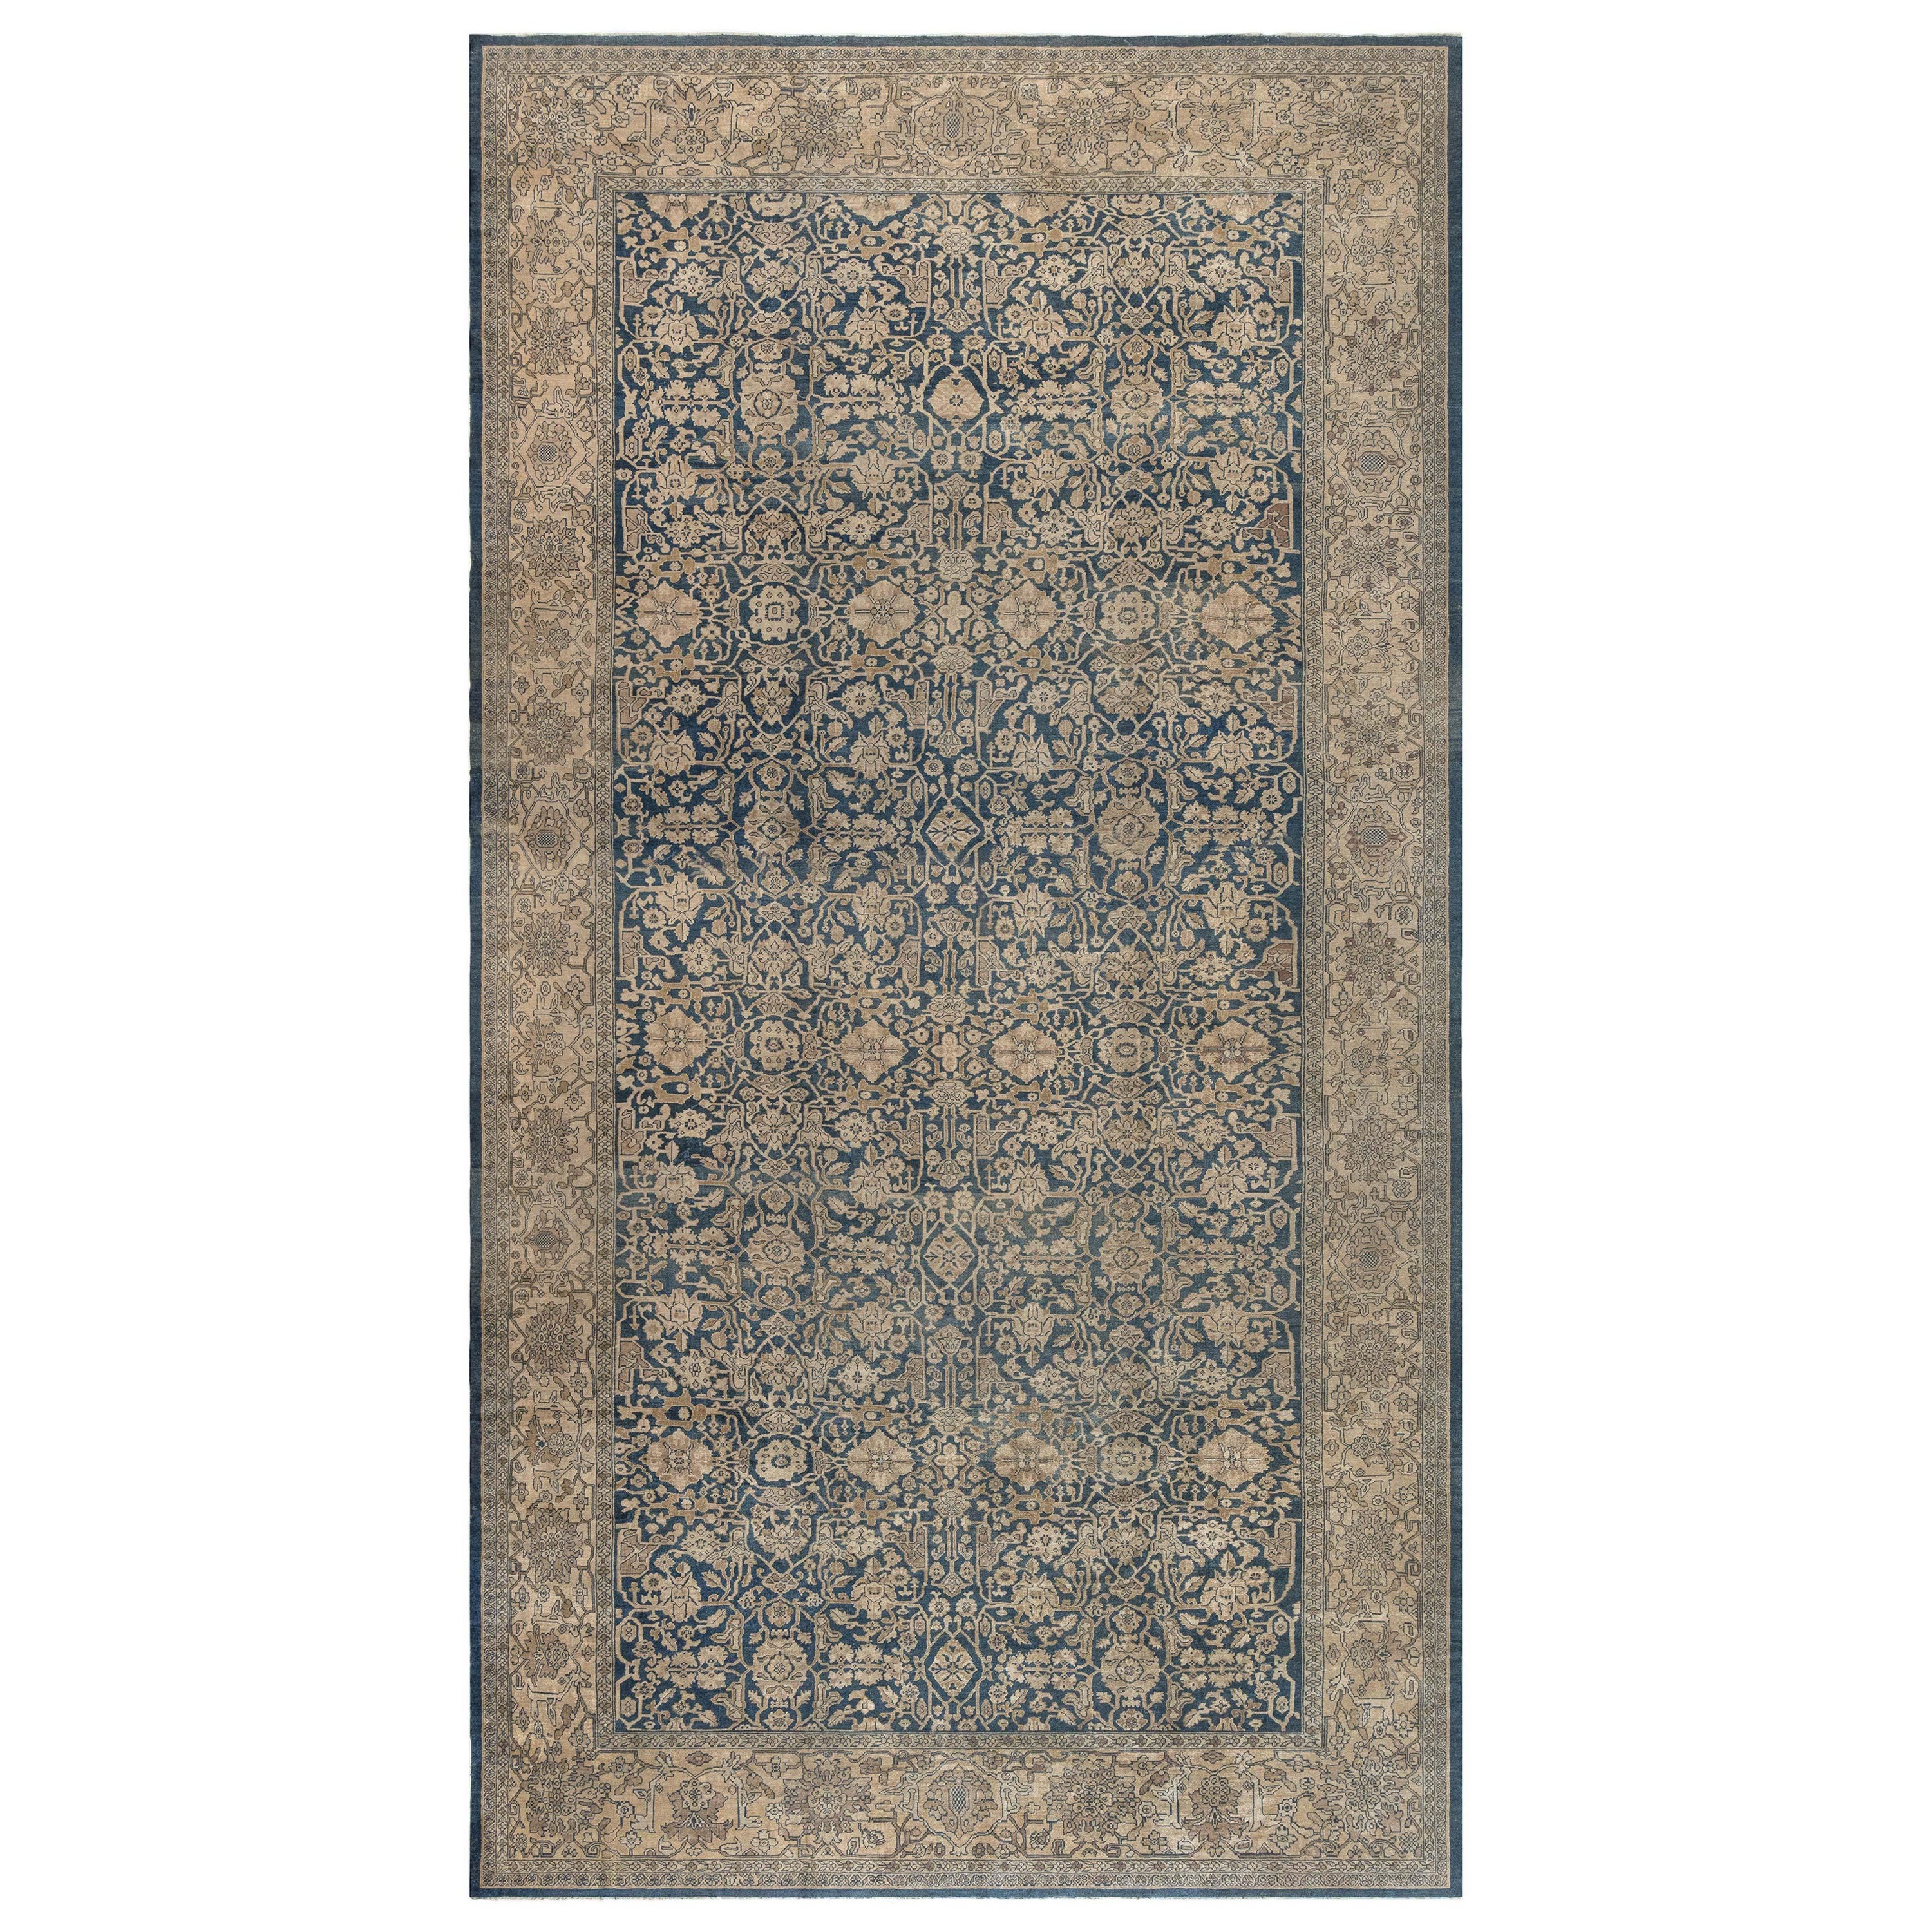 Large Antique Persian Sultanabad Carpet For Sale